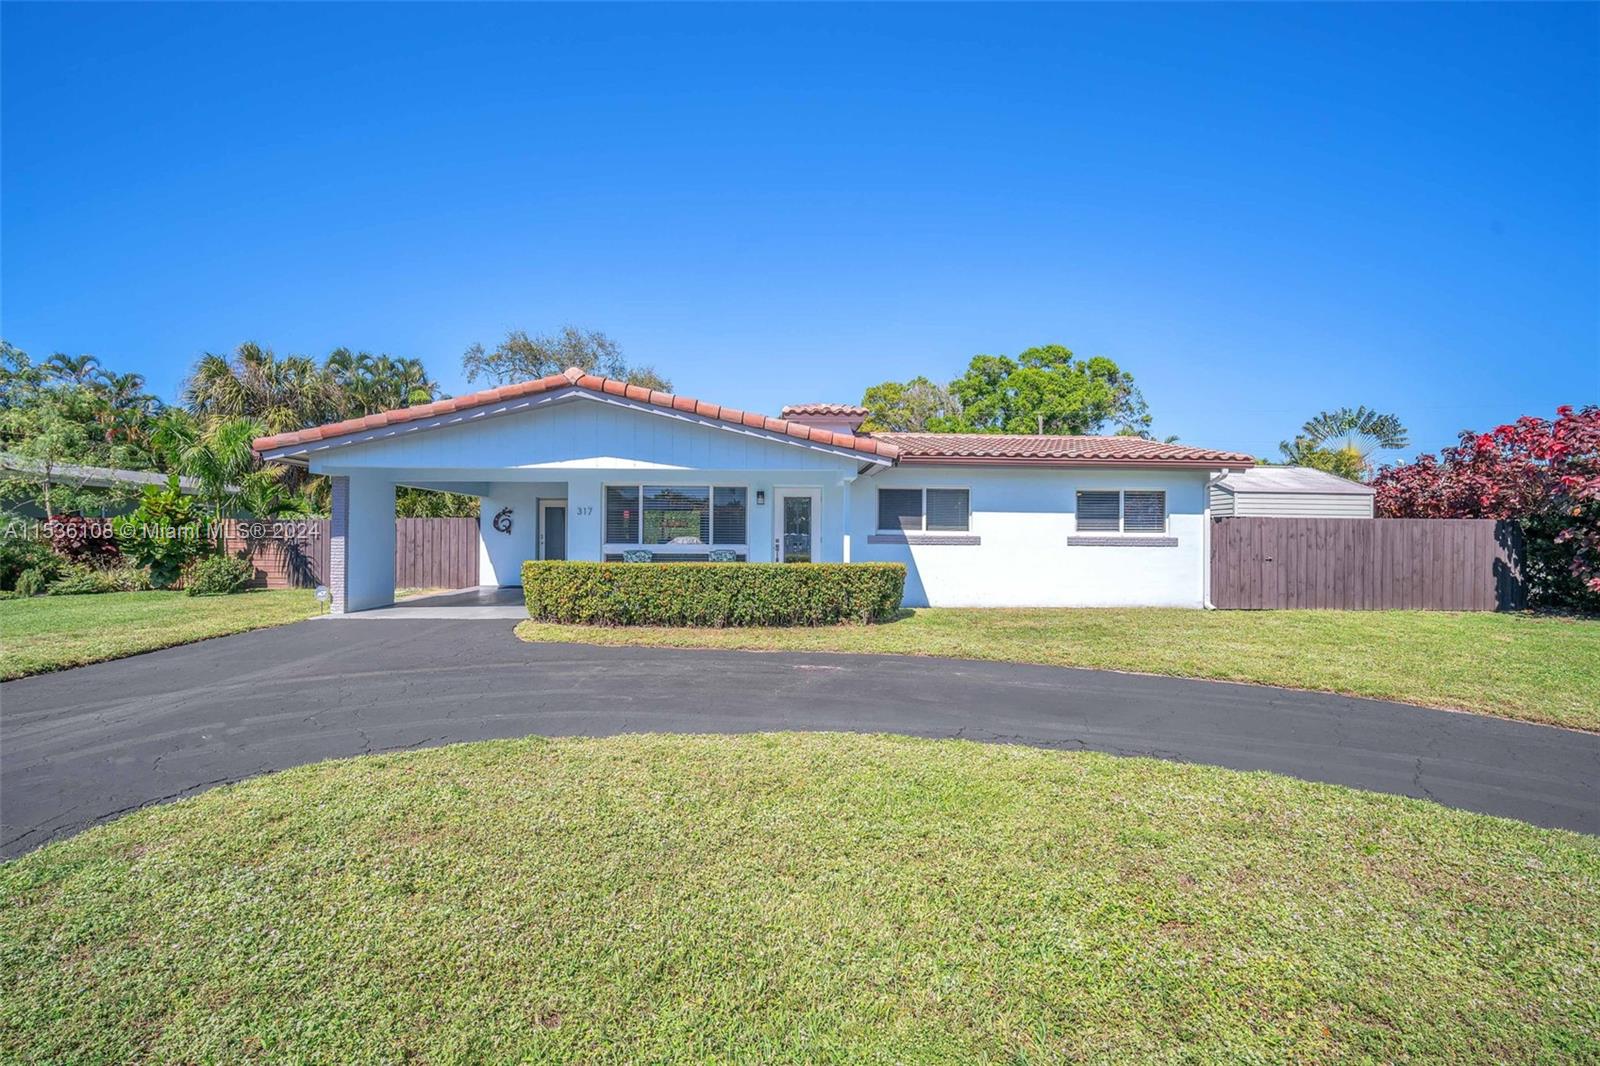 317 Nw 23rd St St, Wilton Manors, Broward County, Florida - 3 Bedrooms  
2 Bathrooms - 